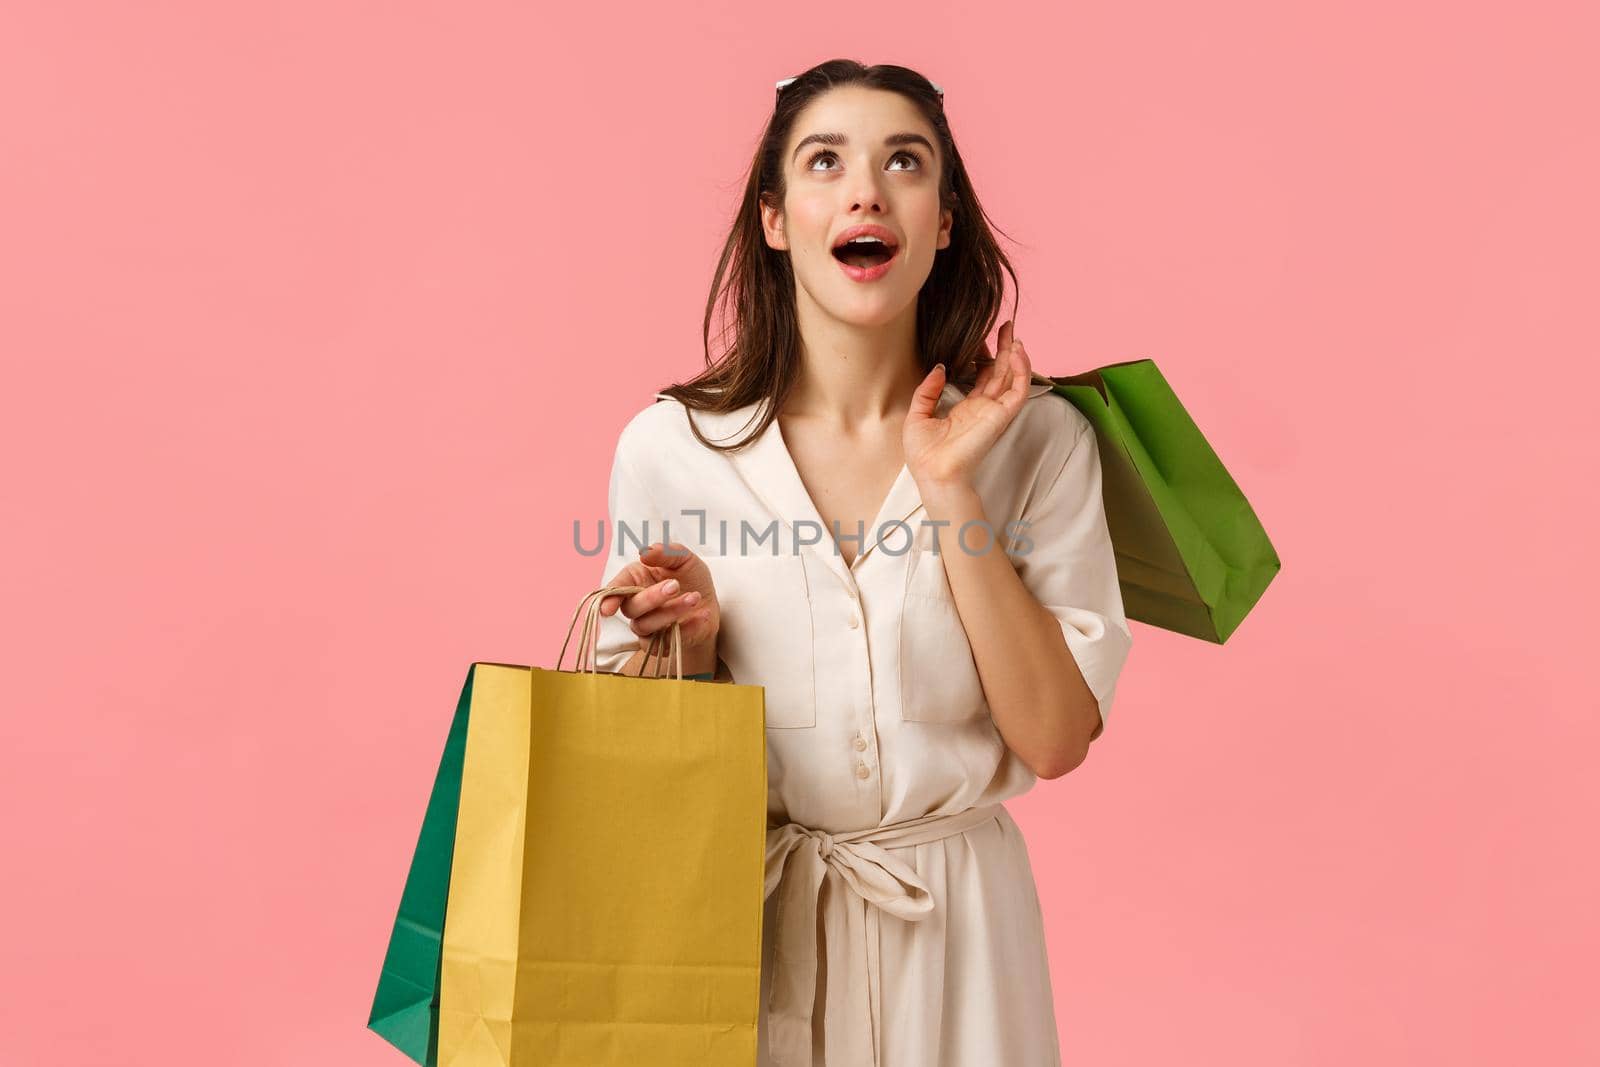 Dreamy excited and amused cheerful brunette girl in dress, holding shopping bags, looking up astonished and amazed, smiling wondered, feeling happy strolling in city malls. Copy space